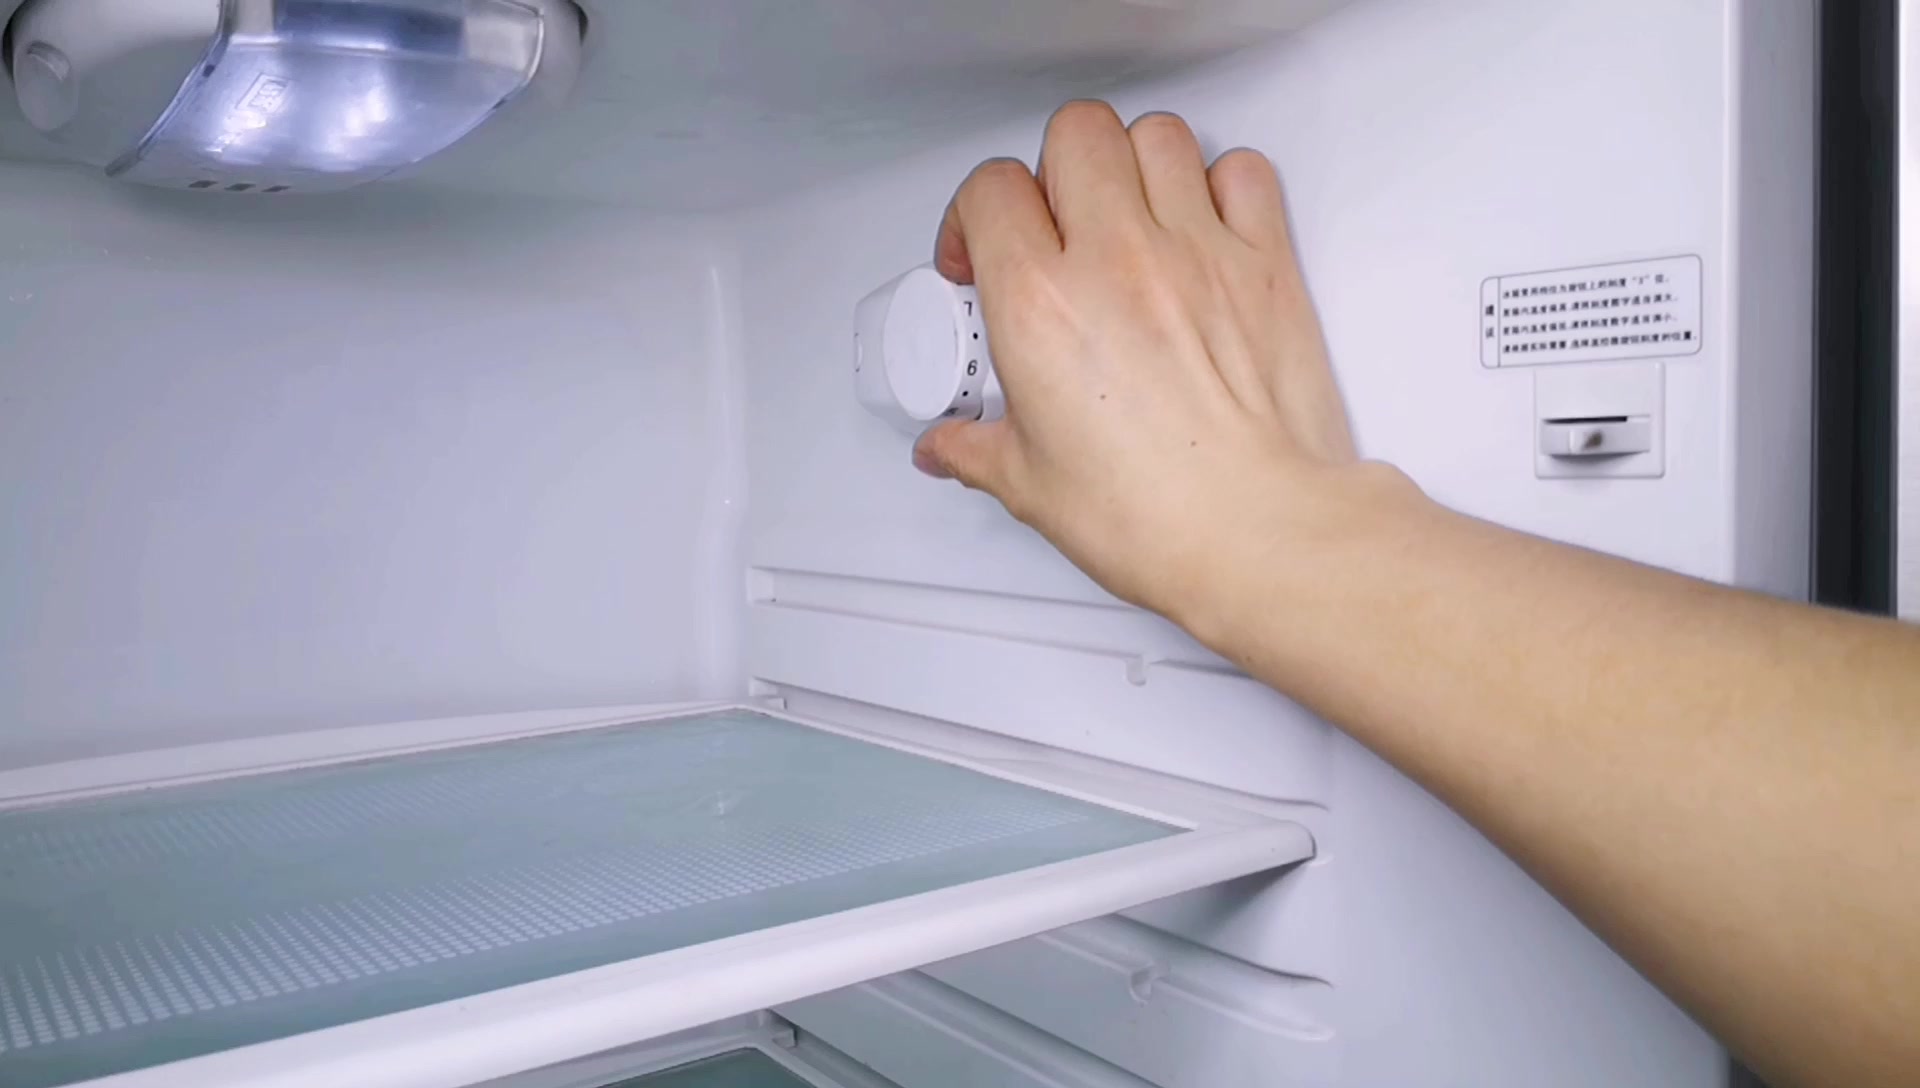 What Are the Most Common Issues with Commercial Refrigerator? (and How to Troubleshoot?)